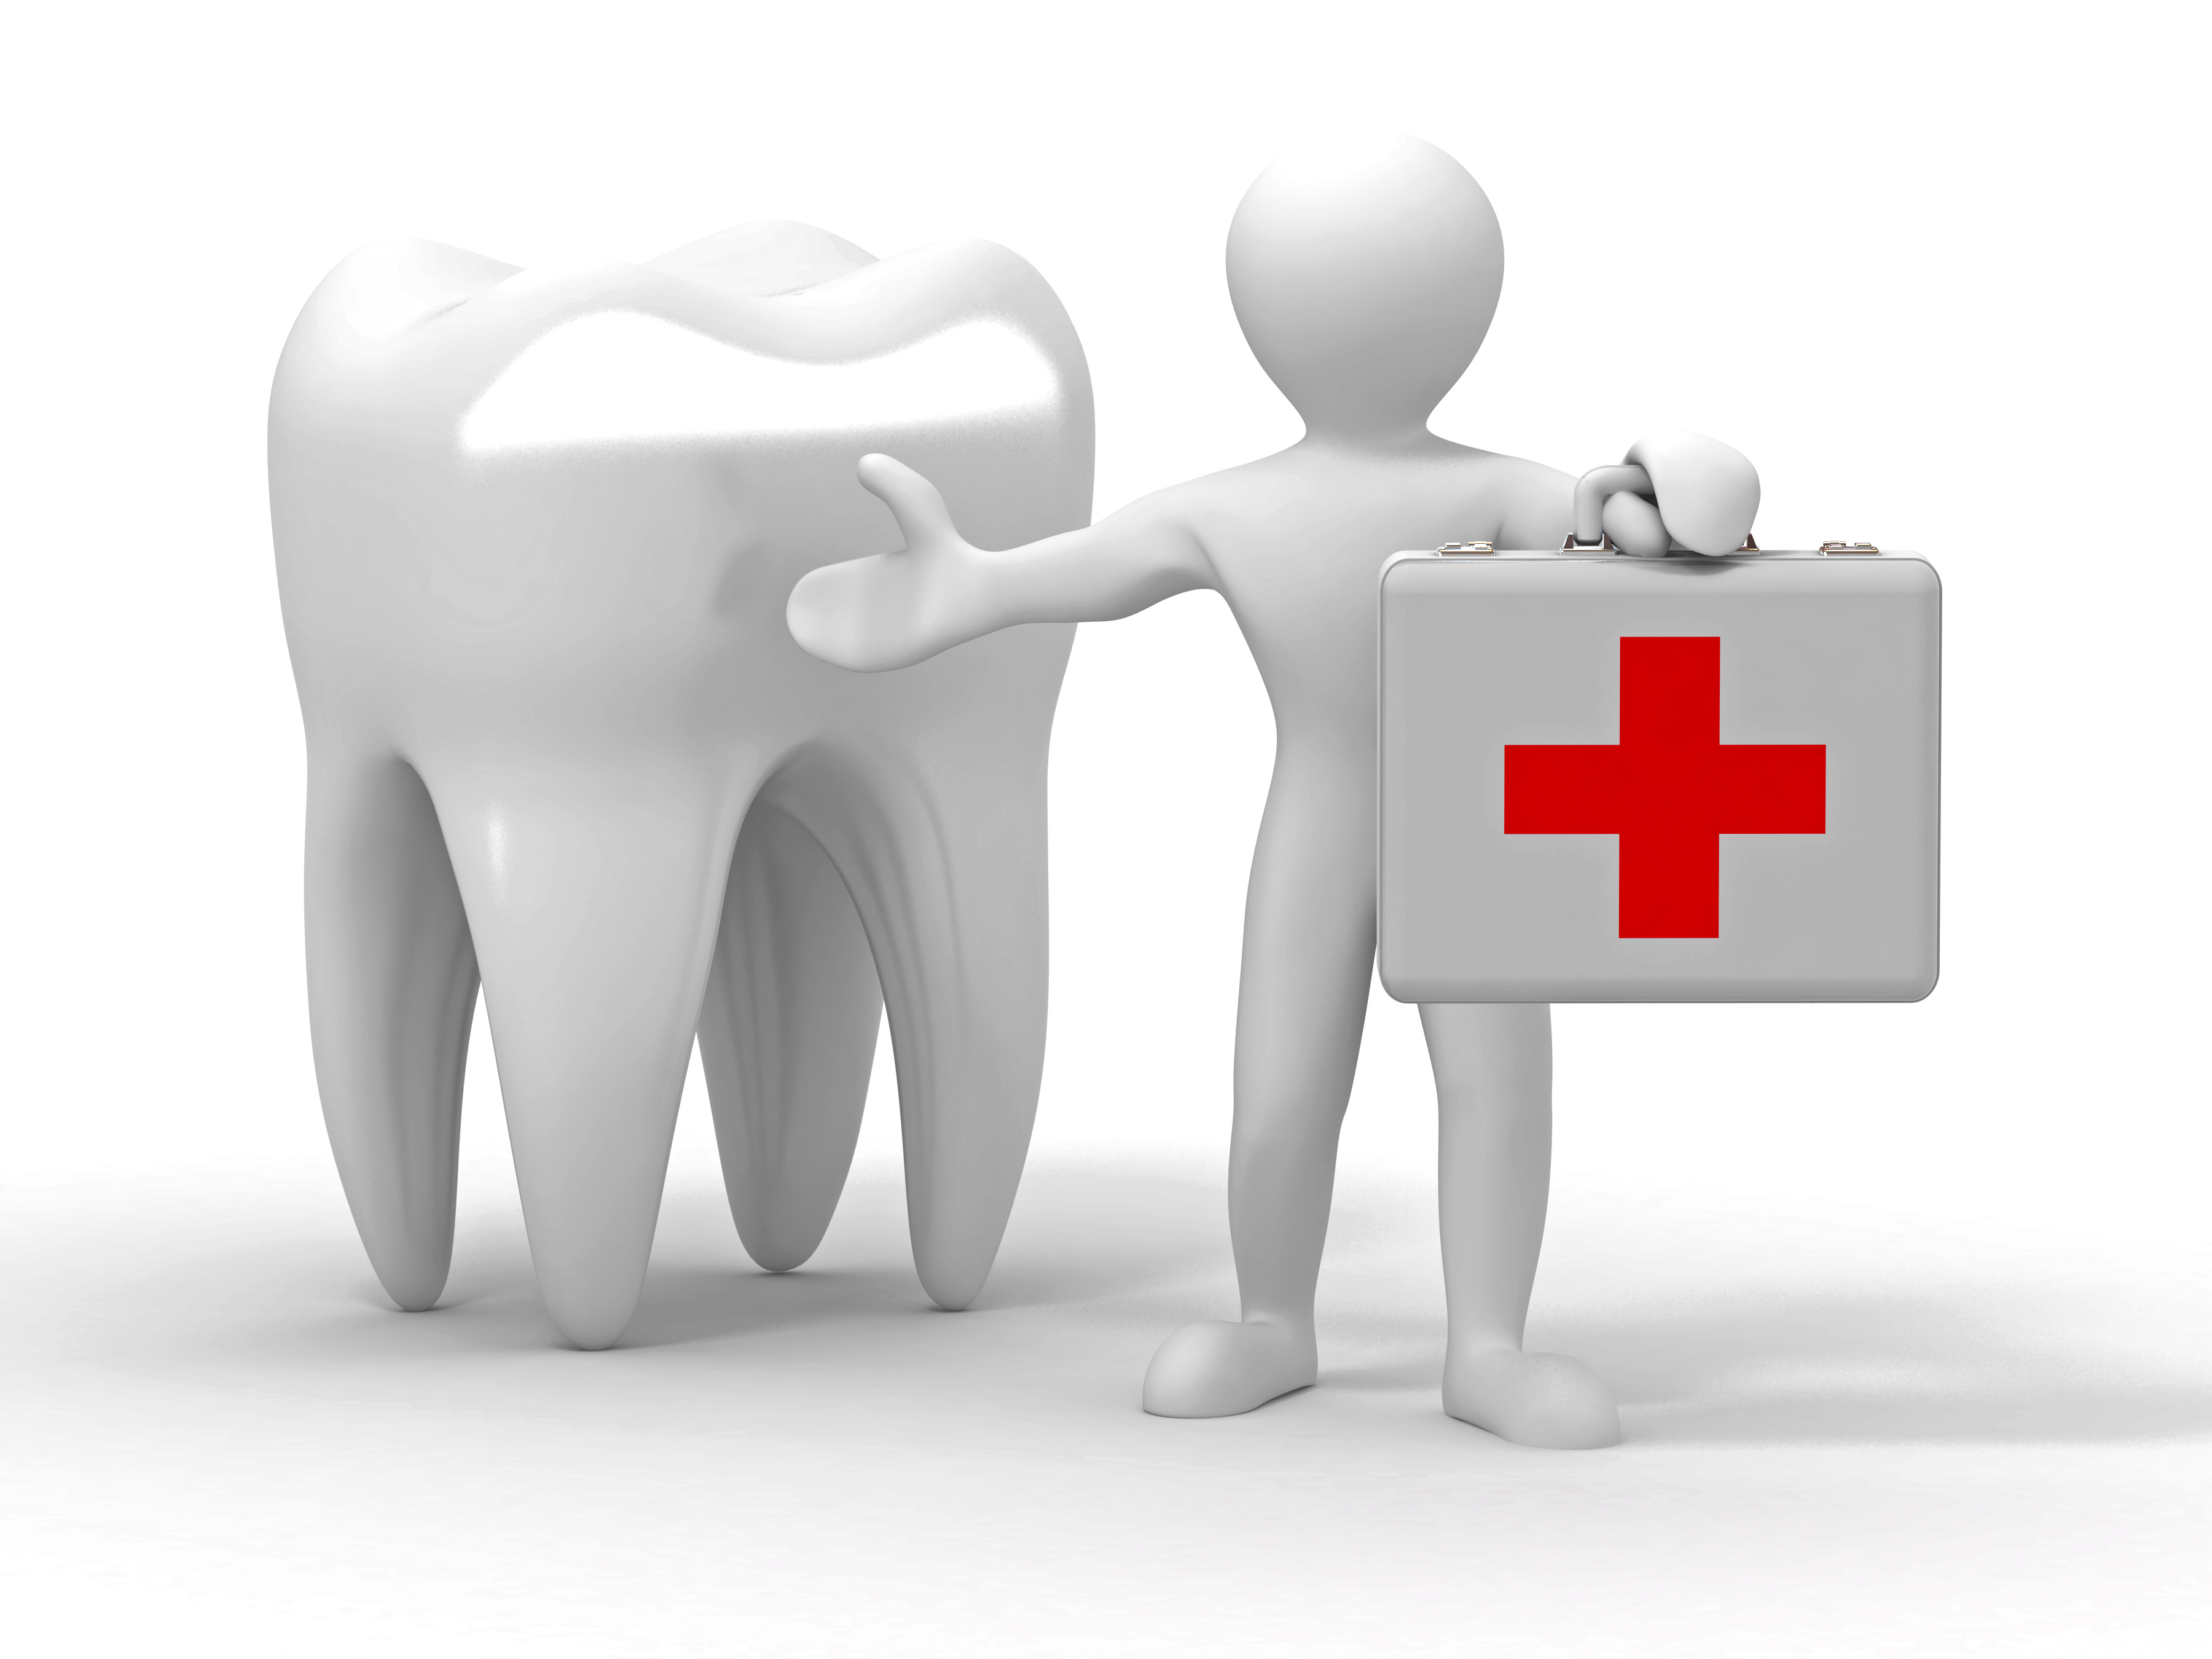 What Do You Need To Do When You Have A Dental Emergency?